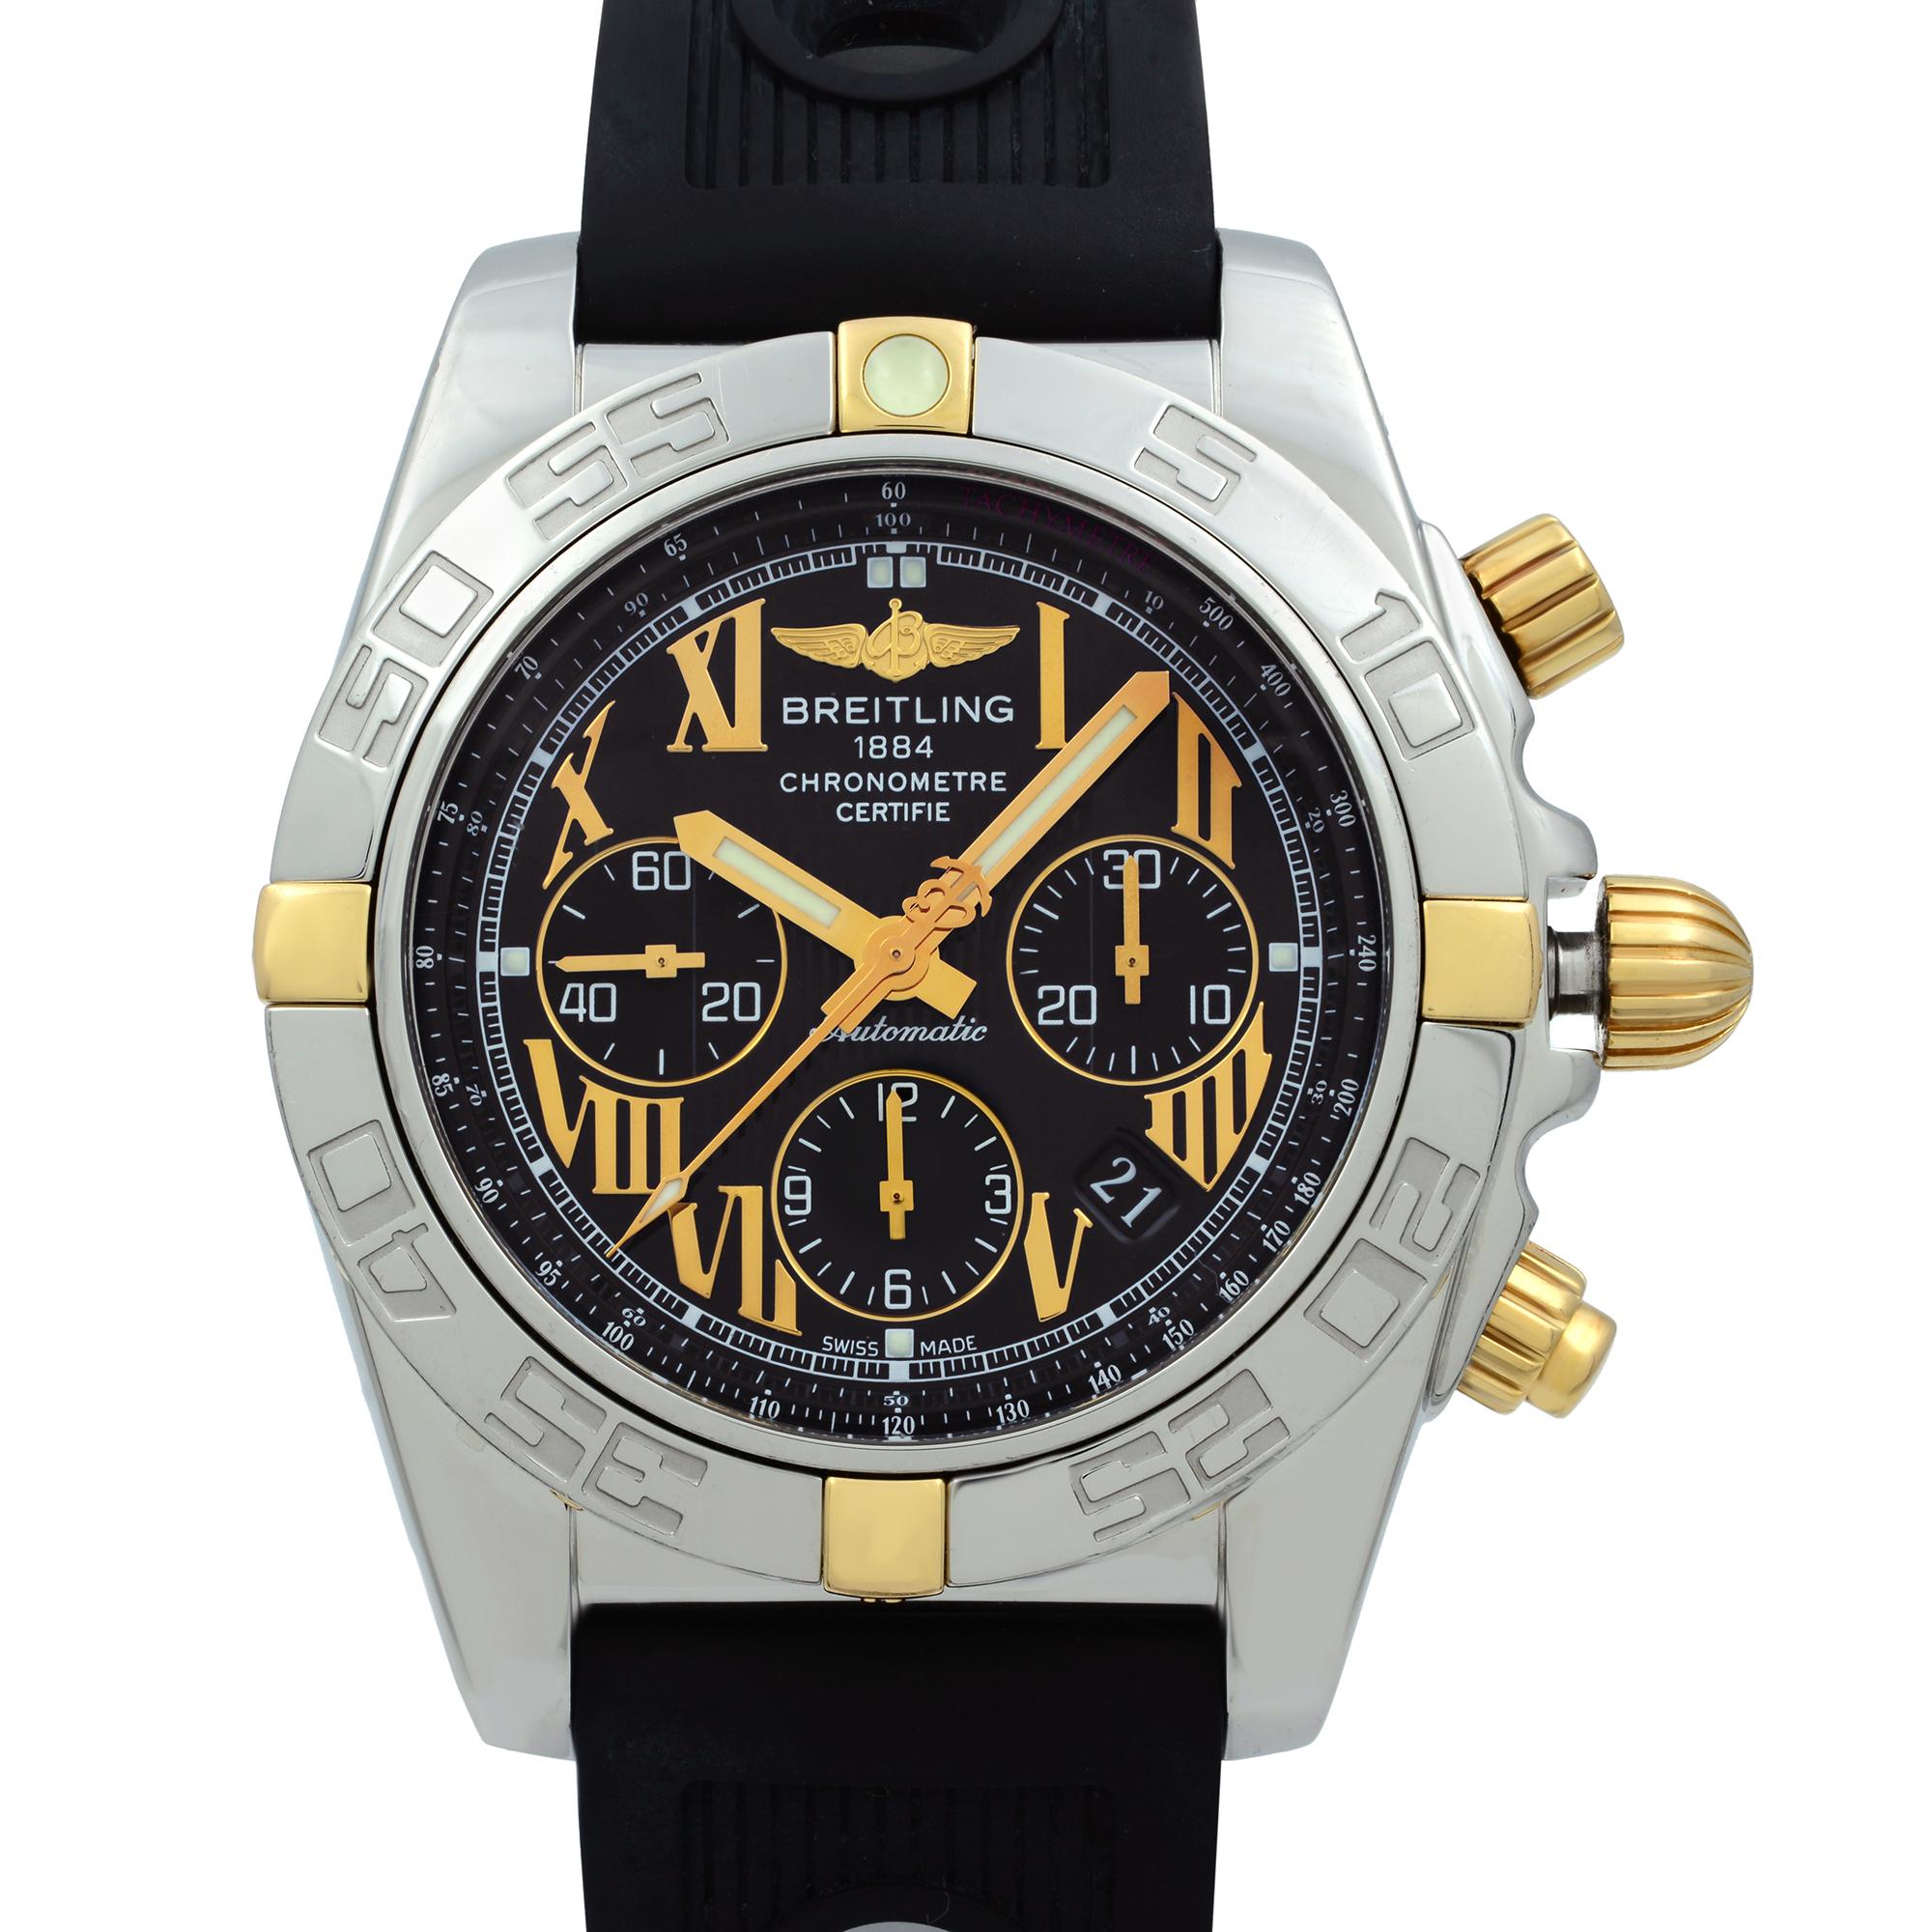 This watch is in mint preowned condition. Original Box and Papers are not included comes with a Chronostore presentation box and authenticity card. Covered by a one-year Chronostore warranty
Details:
Brand Breitling
Color Black
Department Men
Model